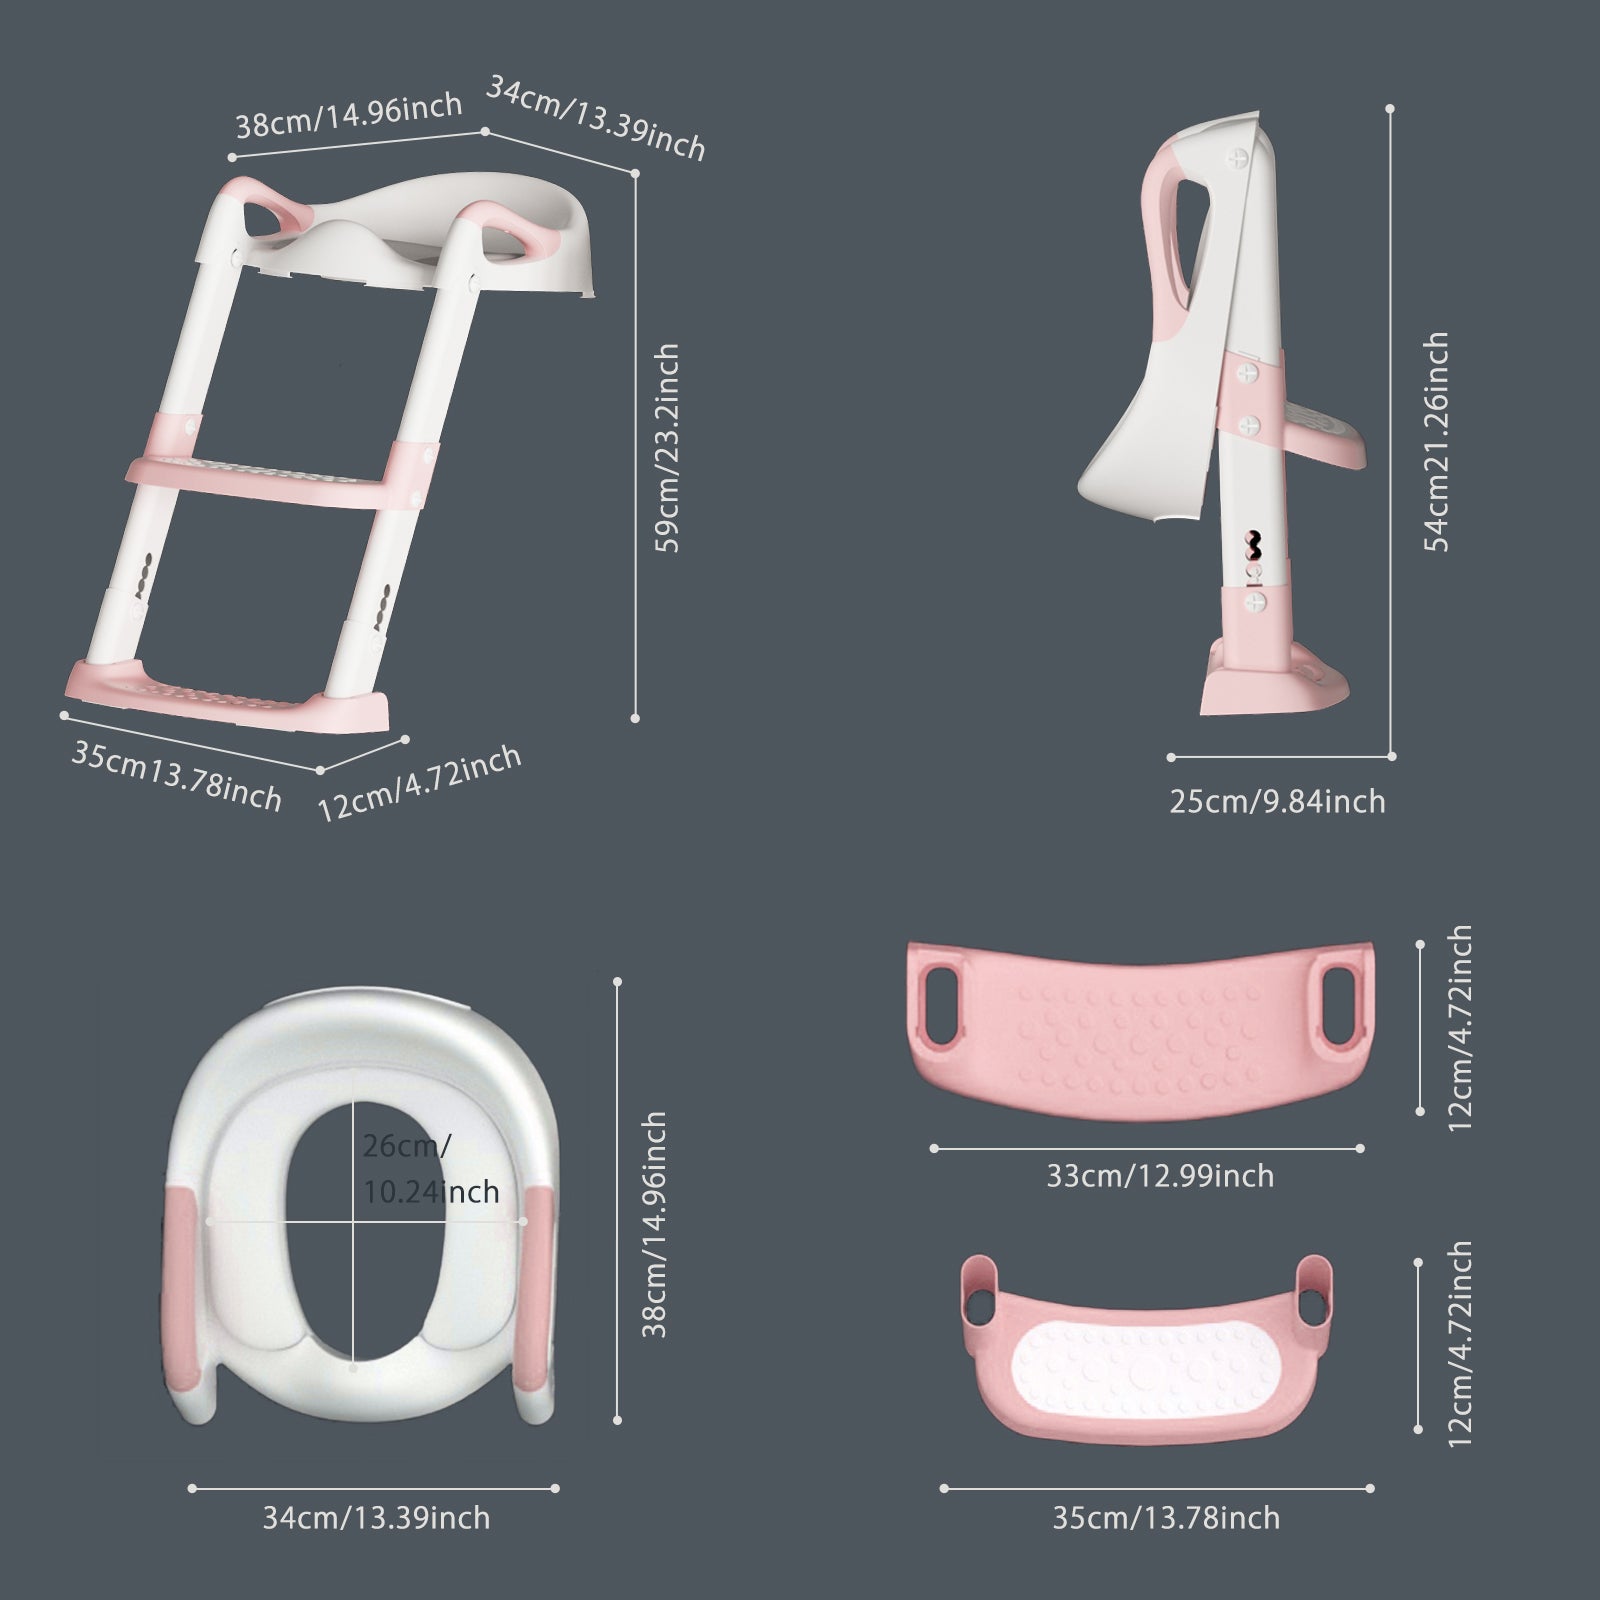 GLAF Toddler Potty Training Seat for Toilet with Ladder in pink In Stock USA